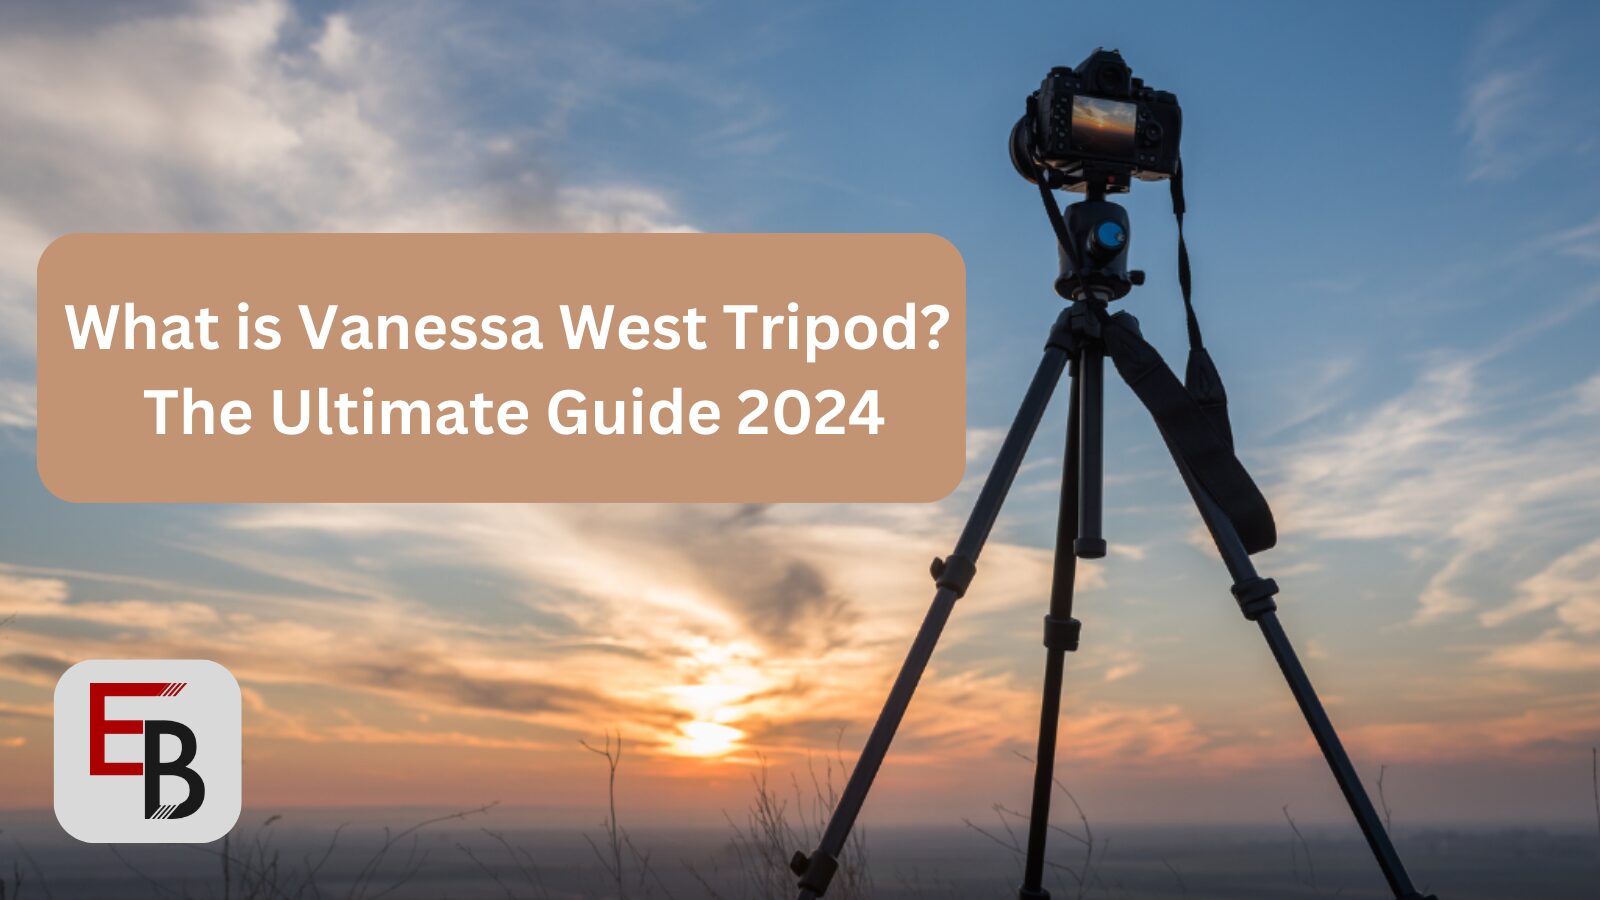 What is Vanessa West Tripod